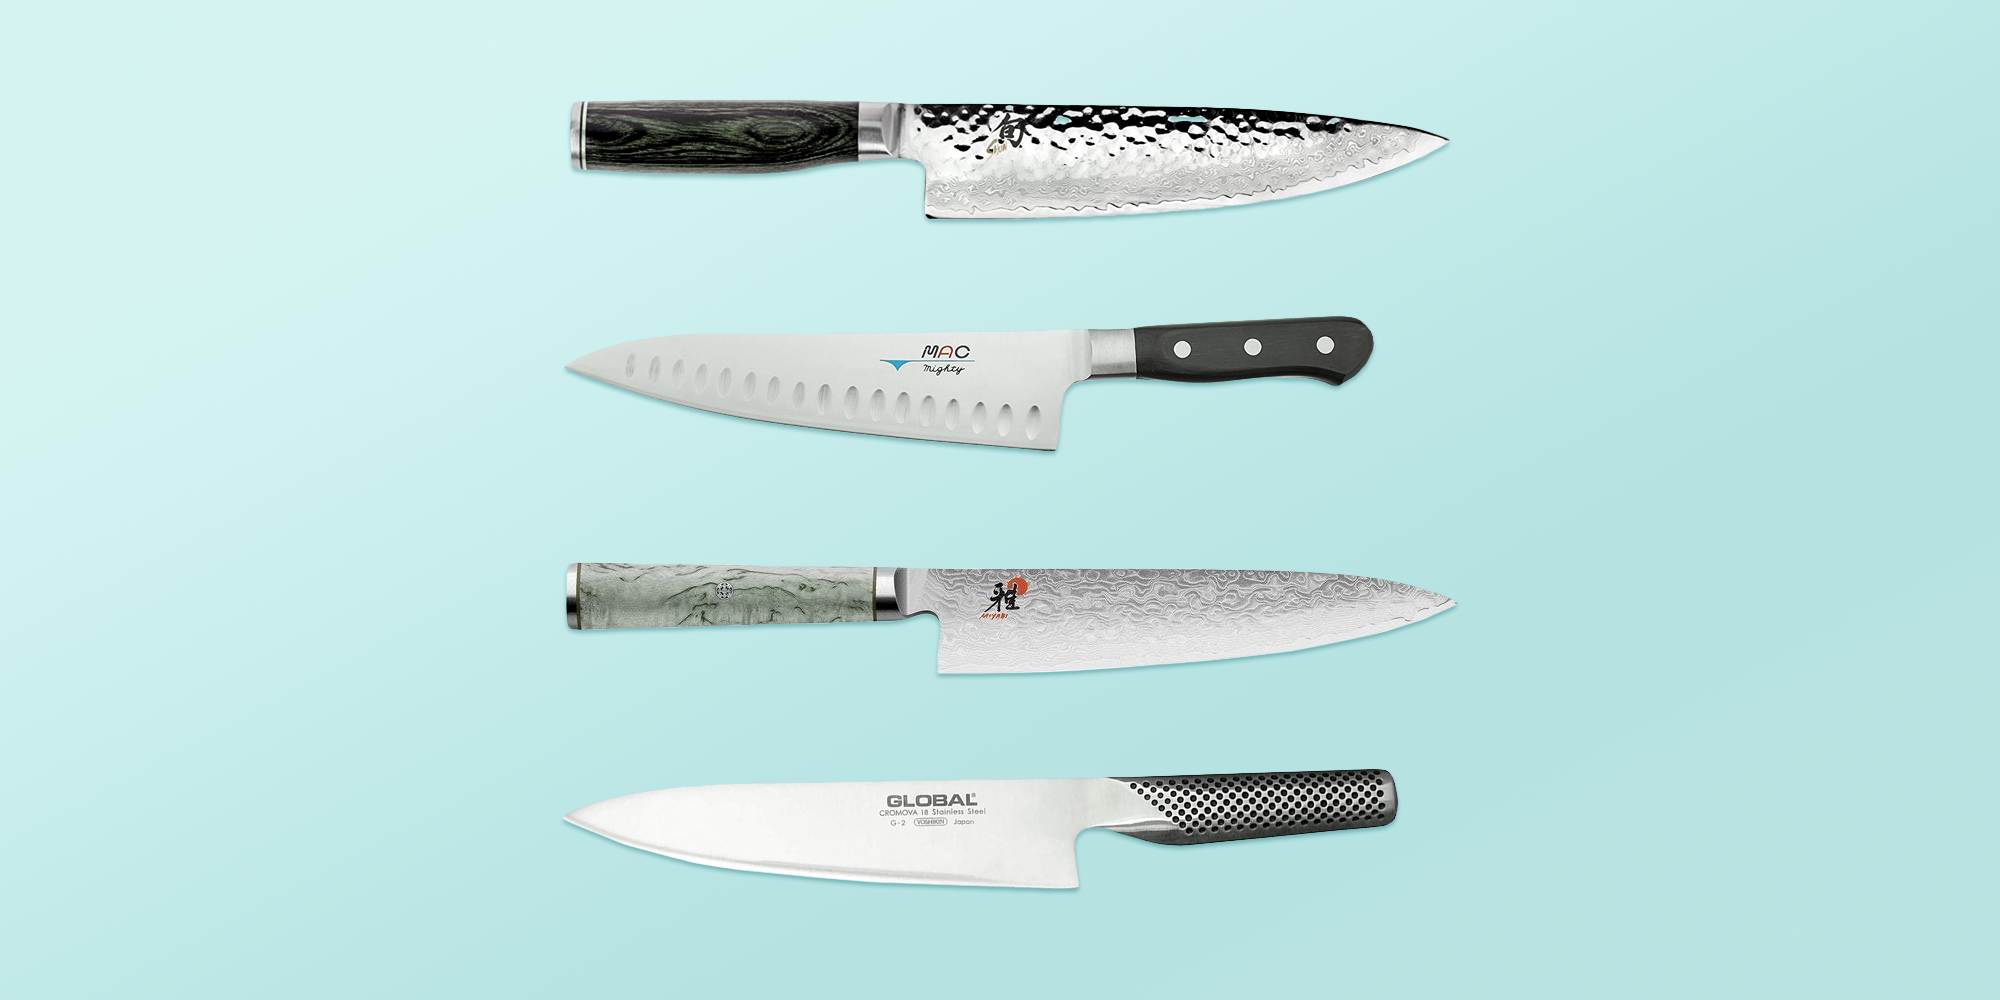 7 Best Japanese Knives 2021 - Top Japanese Kitchen Knife Reviews